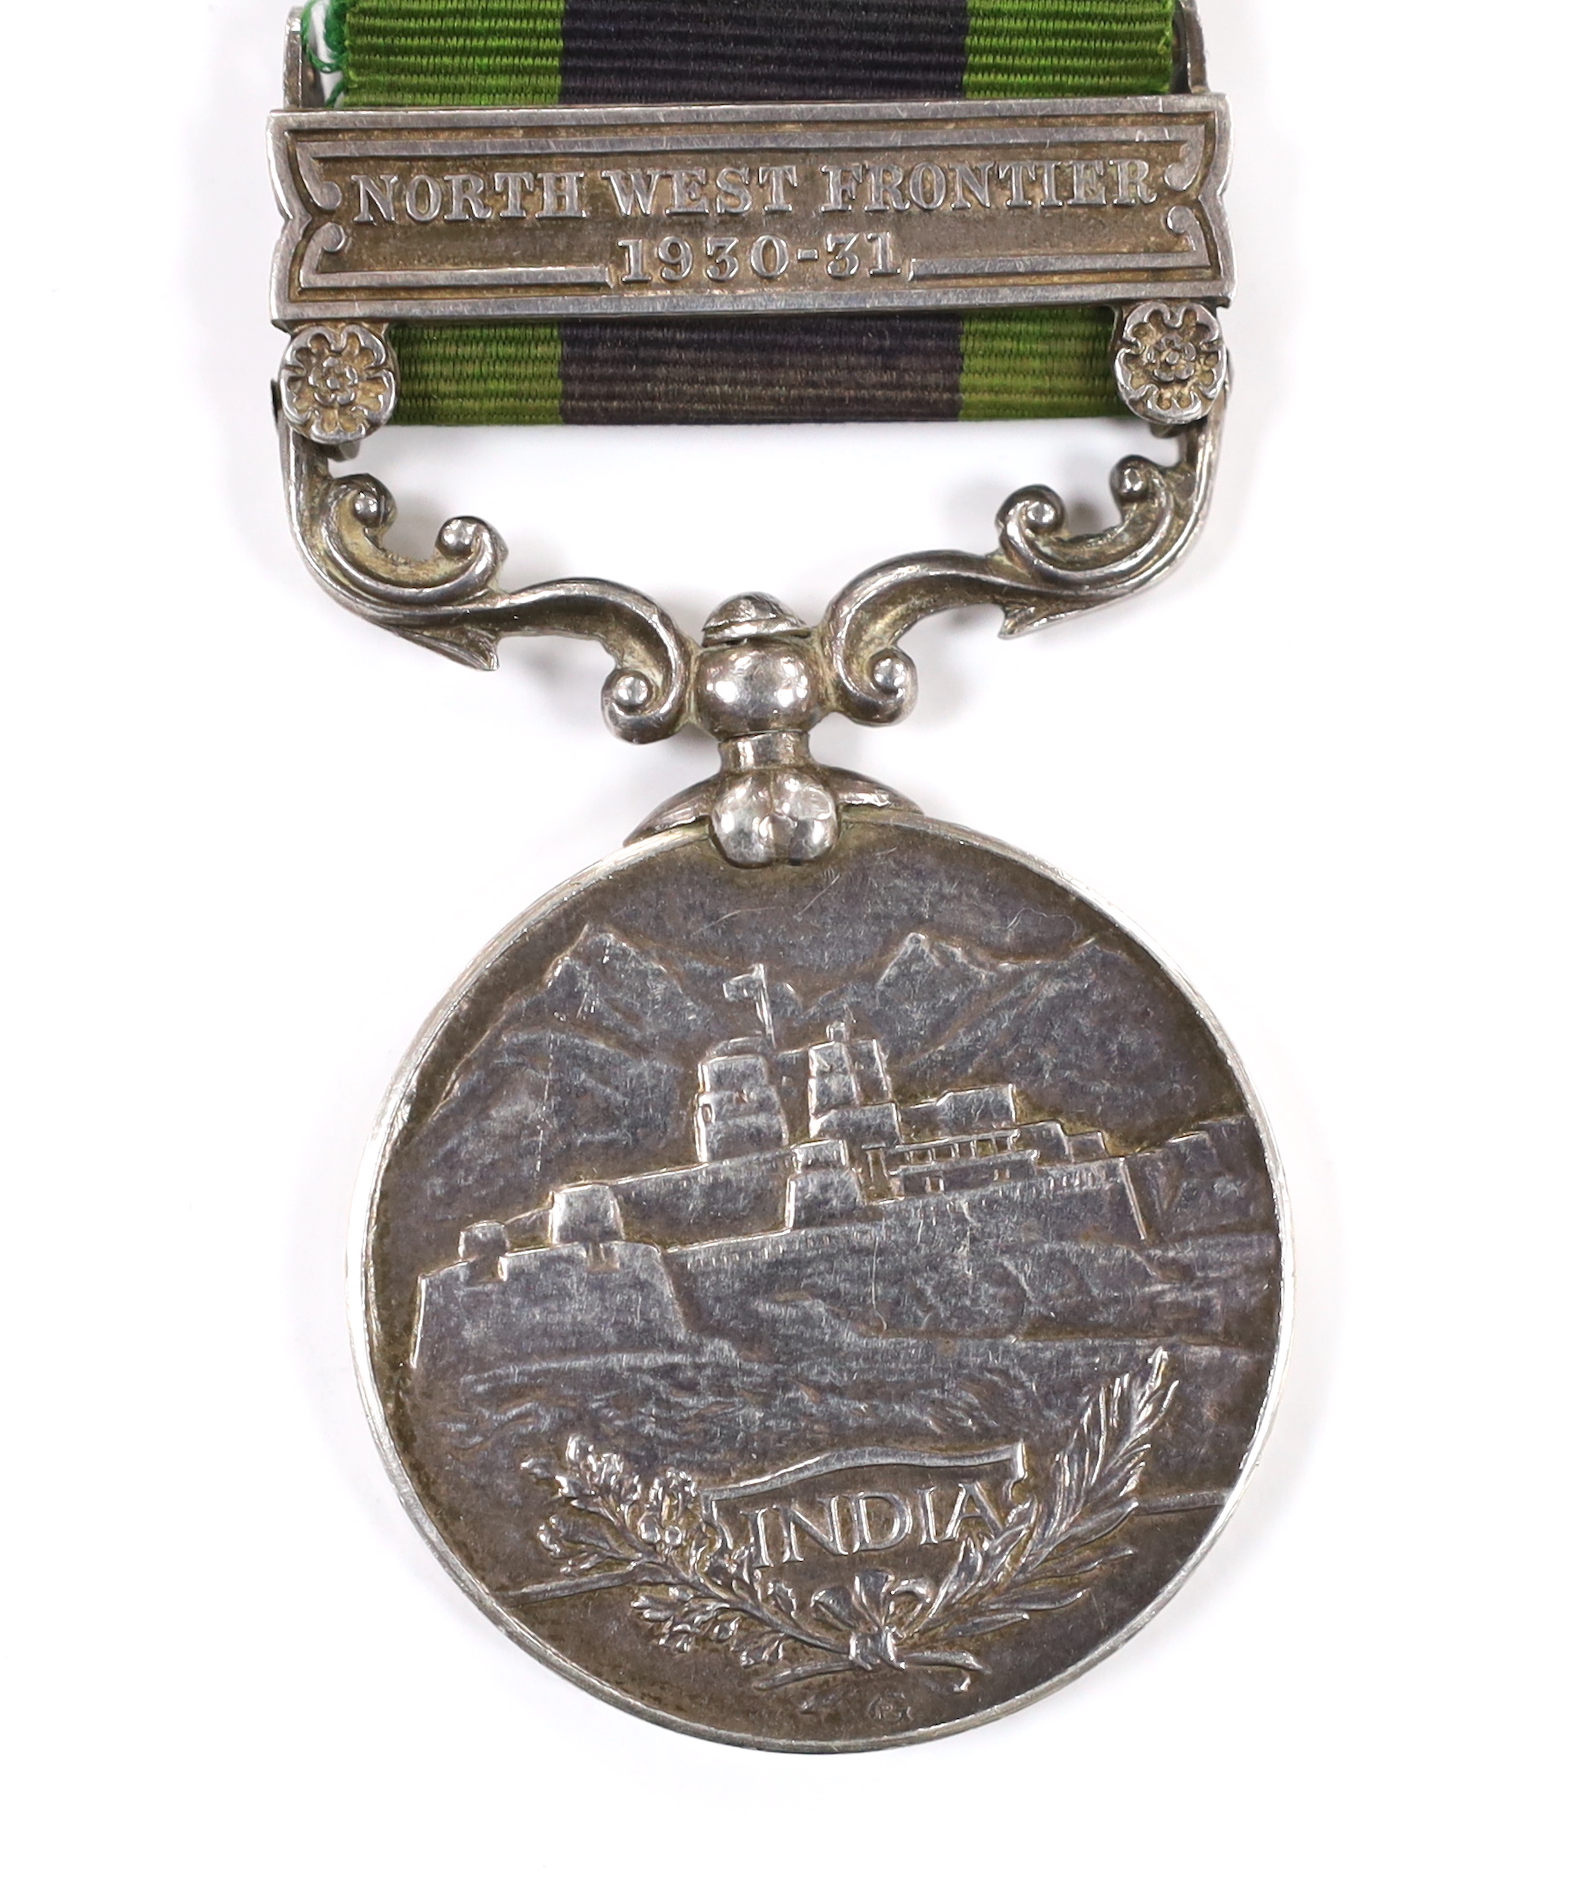 A George V India medal to L.A.C. S.W. Lipscomb R.A.F. with two bars for North West Frontier 1930-31 and Mohmand 1933